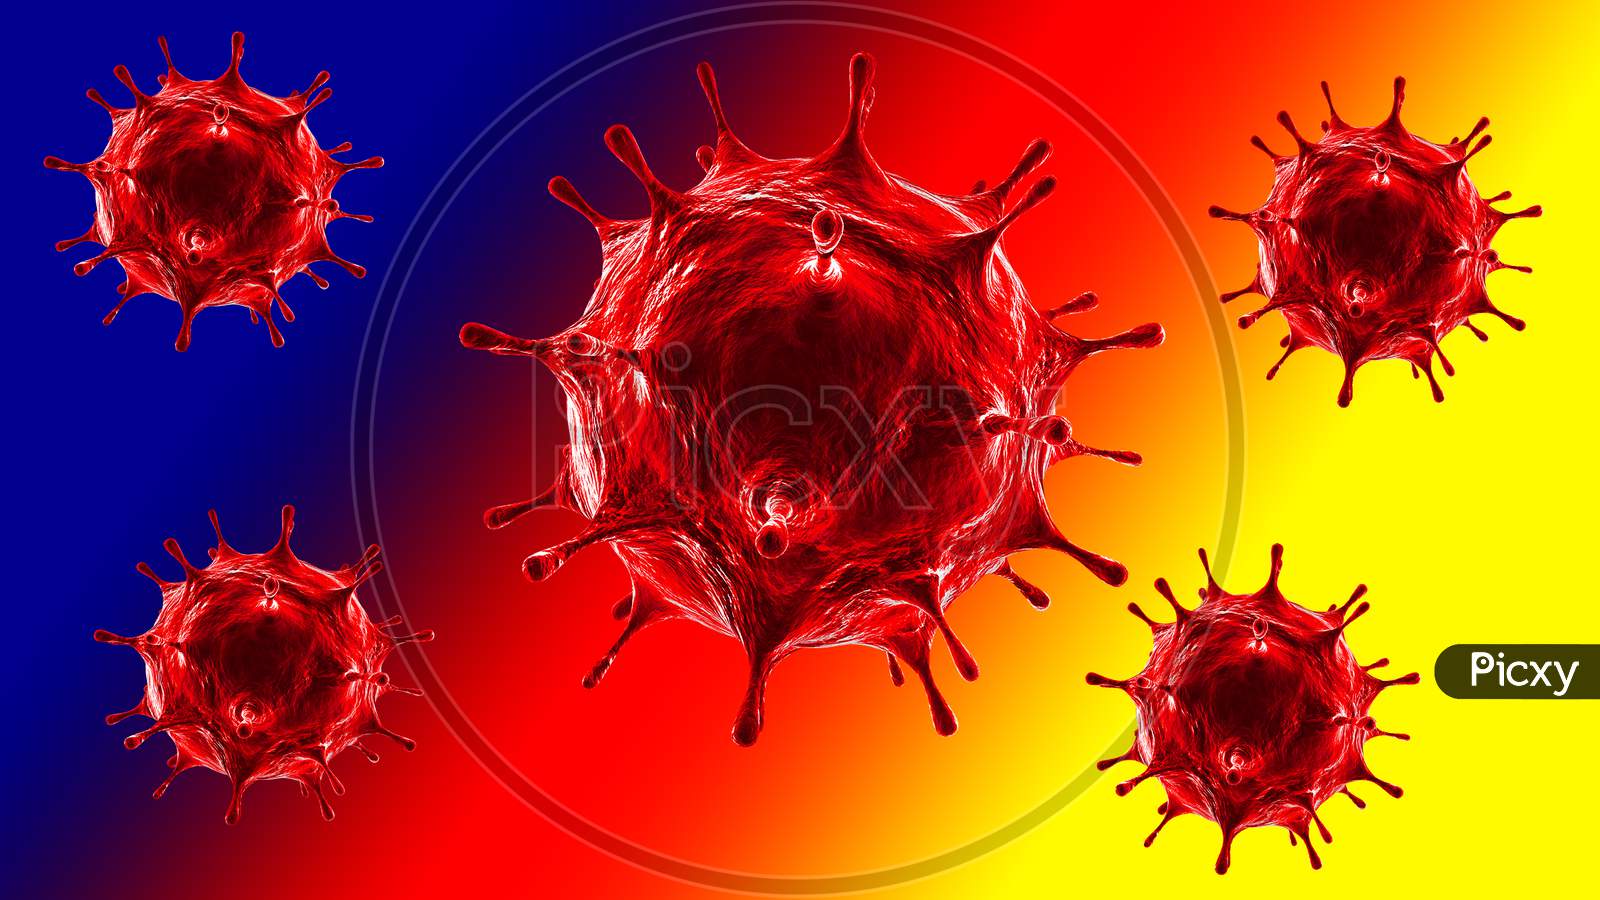 3D Corona virus, travel world, Airplane, world with colored background.